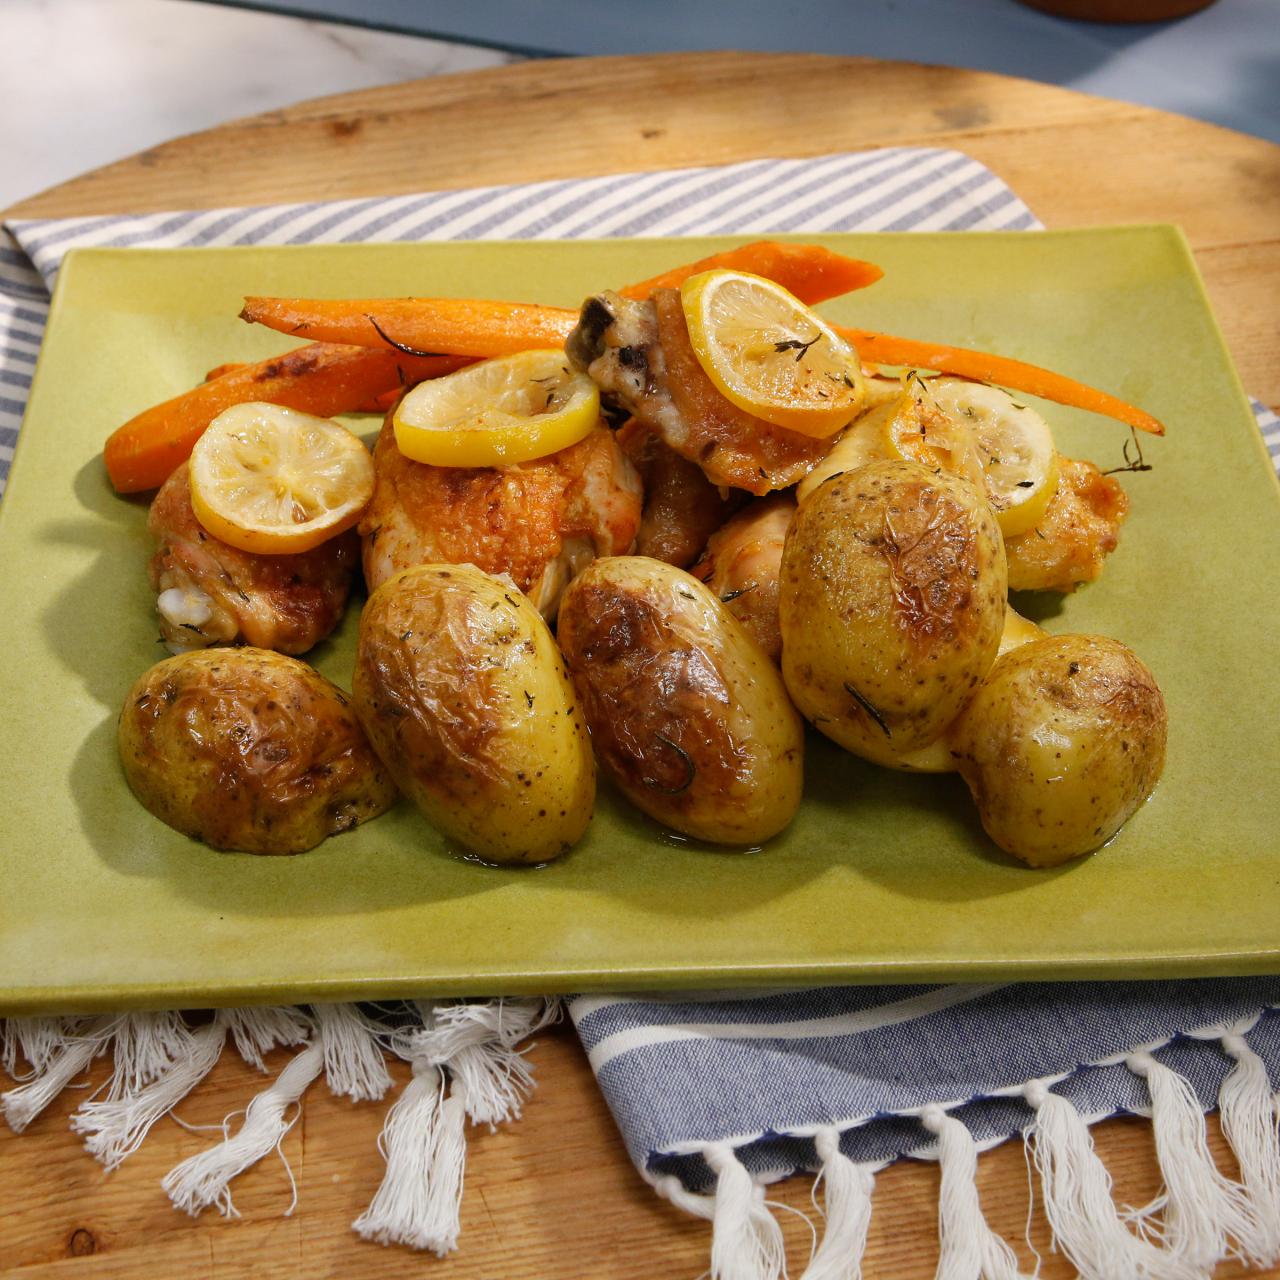 https://food.fnr.sndimg.com/content/dam/images/food/fullset/2015/9/10/1/KC0704_Roasted-Rosemary-and-Thyme-Chicken_s4x3.jpg.rend.hgtvcom.1280.1280.suffix/1442418405878.jpeg